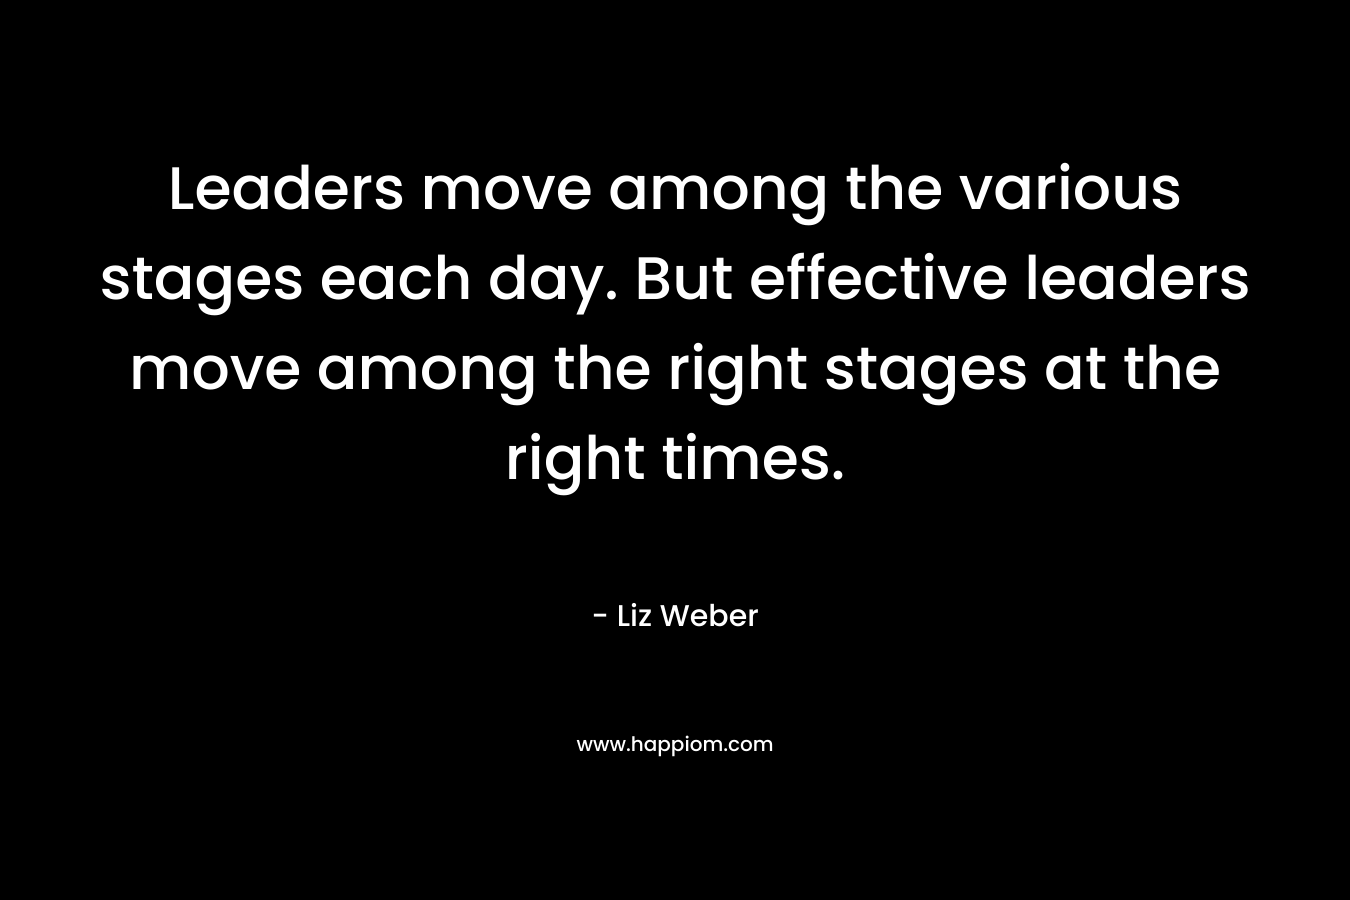 Leaders move among the various stages each day. But effective leaders move among the right stages at the right times.